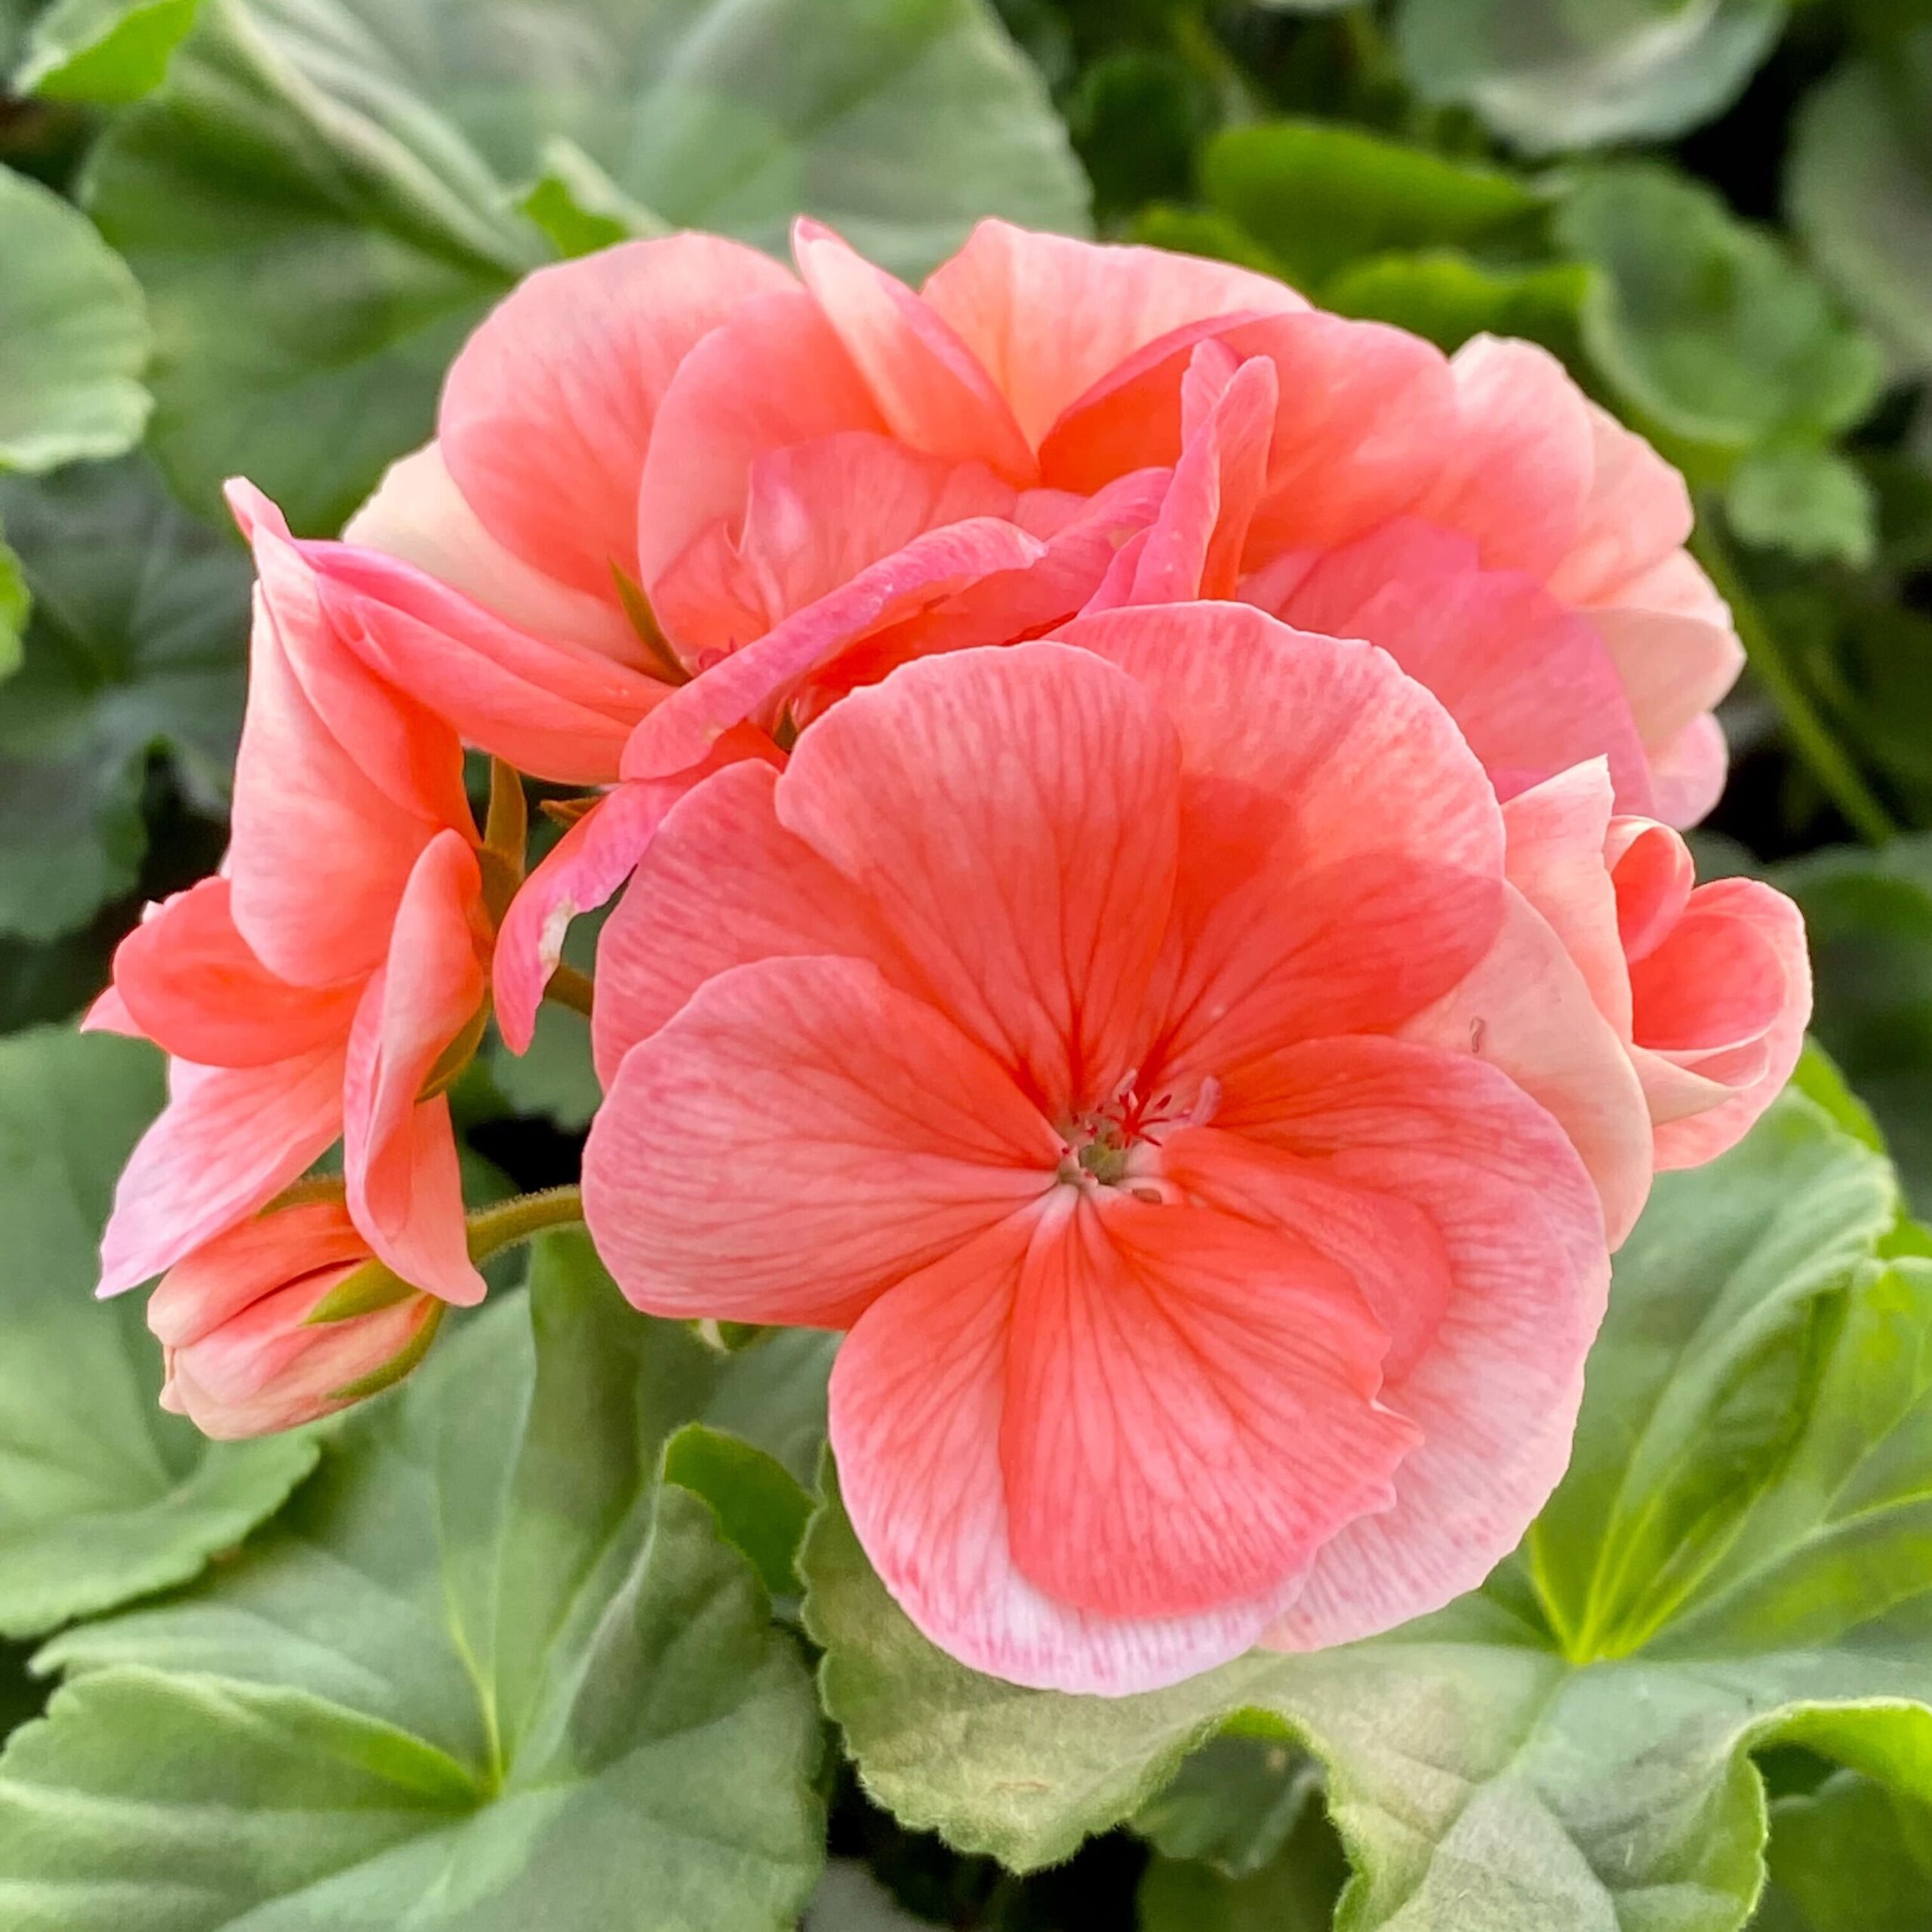 2022 Greenstreet Growers Wholesale Availability Landscaping Finished Annuals Dynamo Geranium Salmon